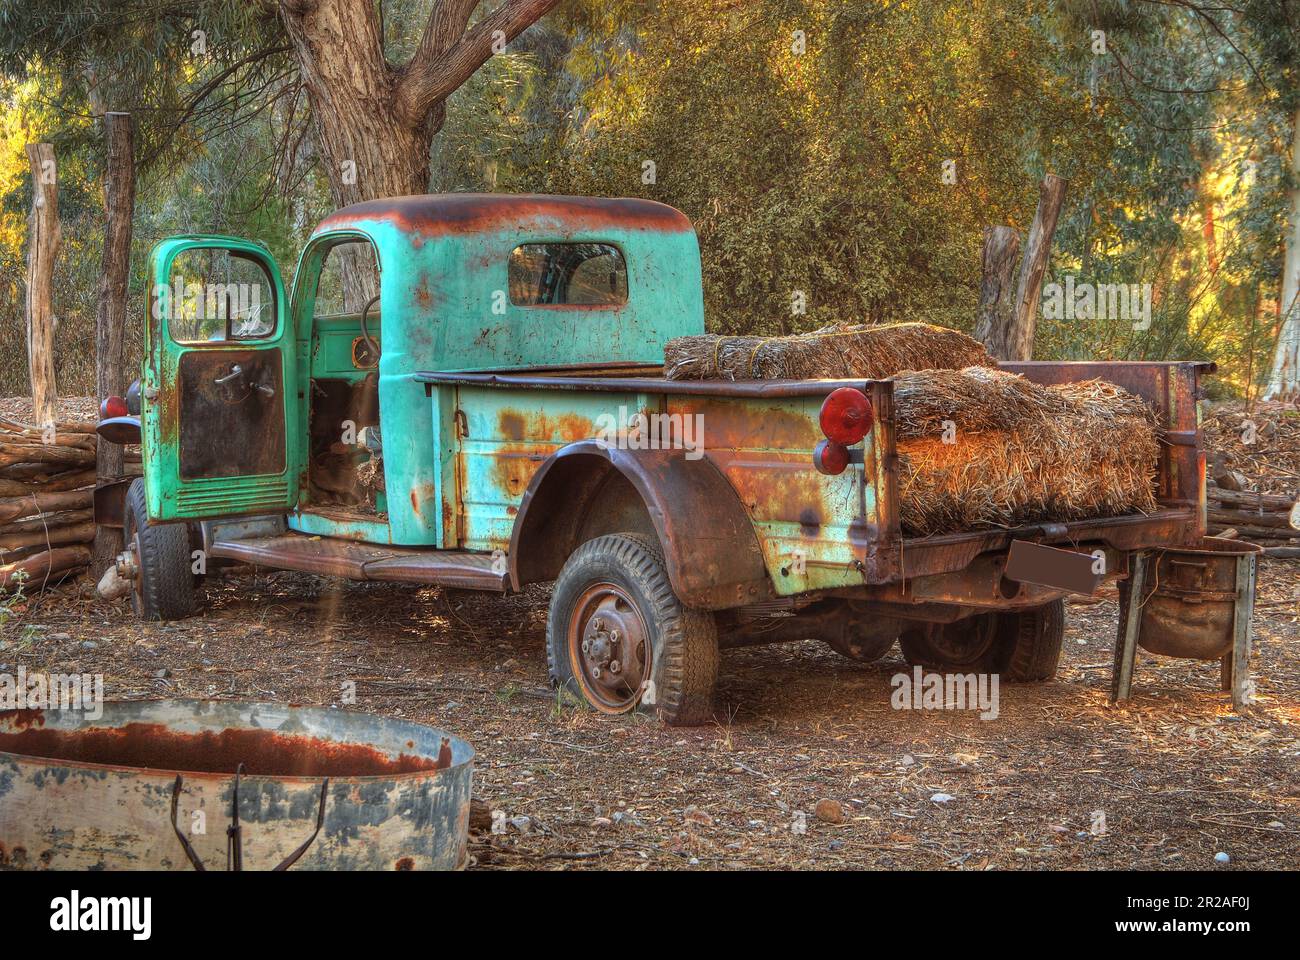 Broken down and rusty old truck with flat tires Stock Photo